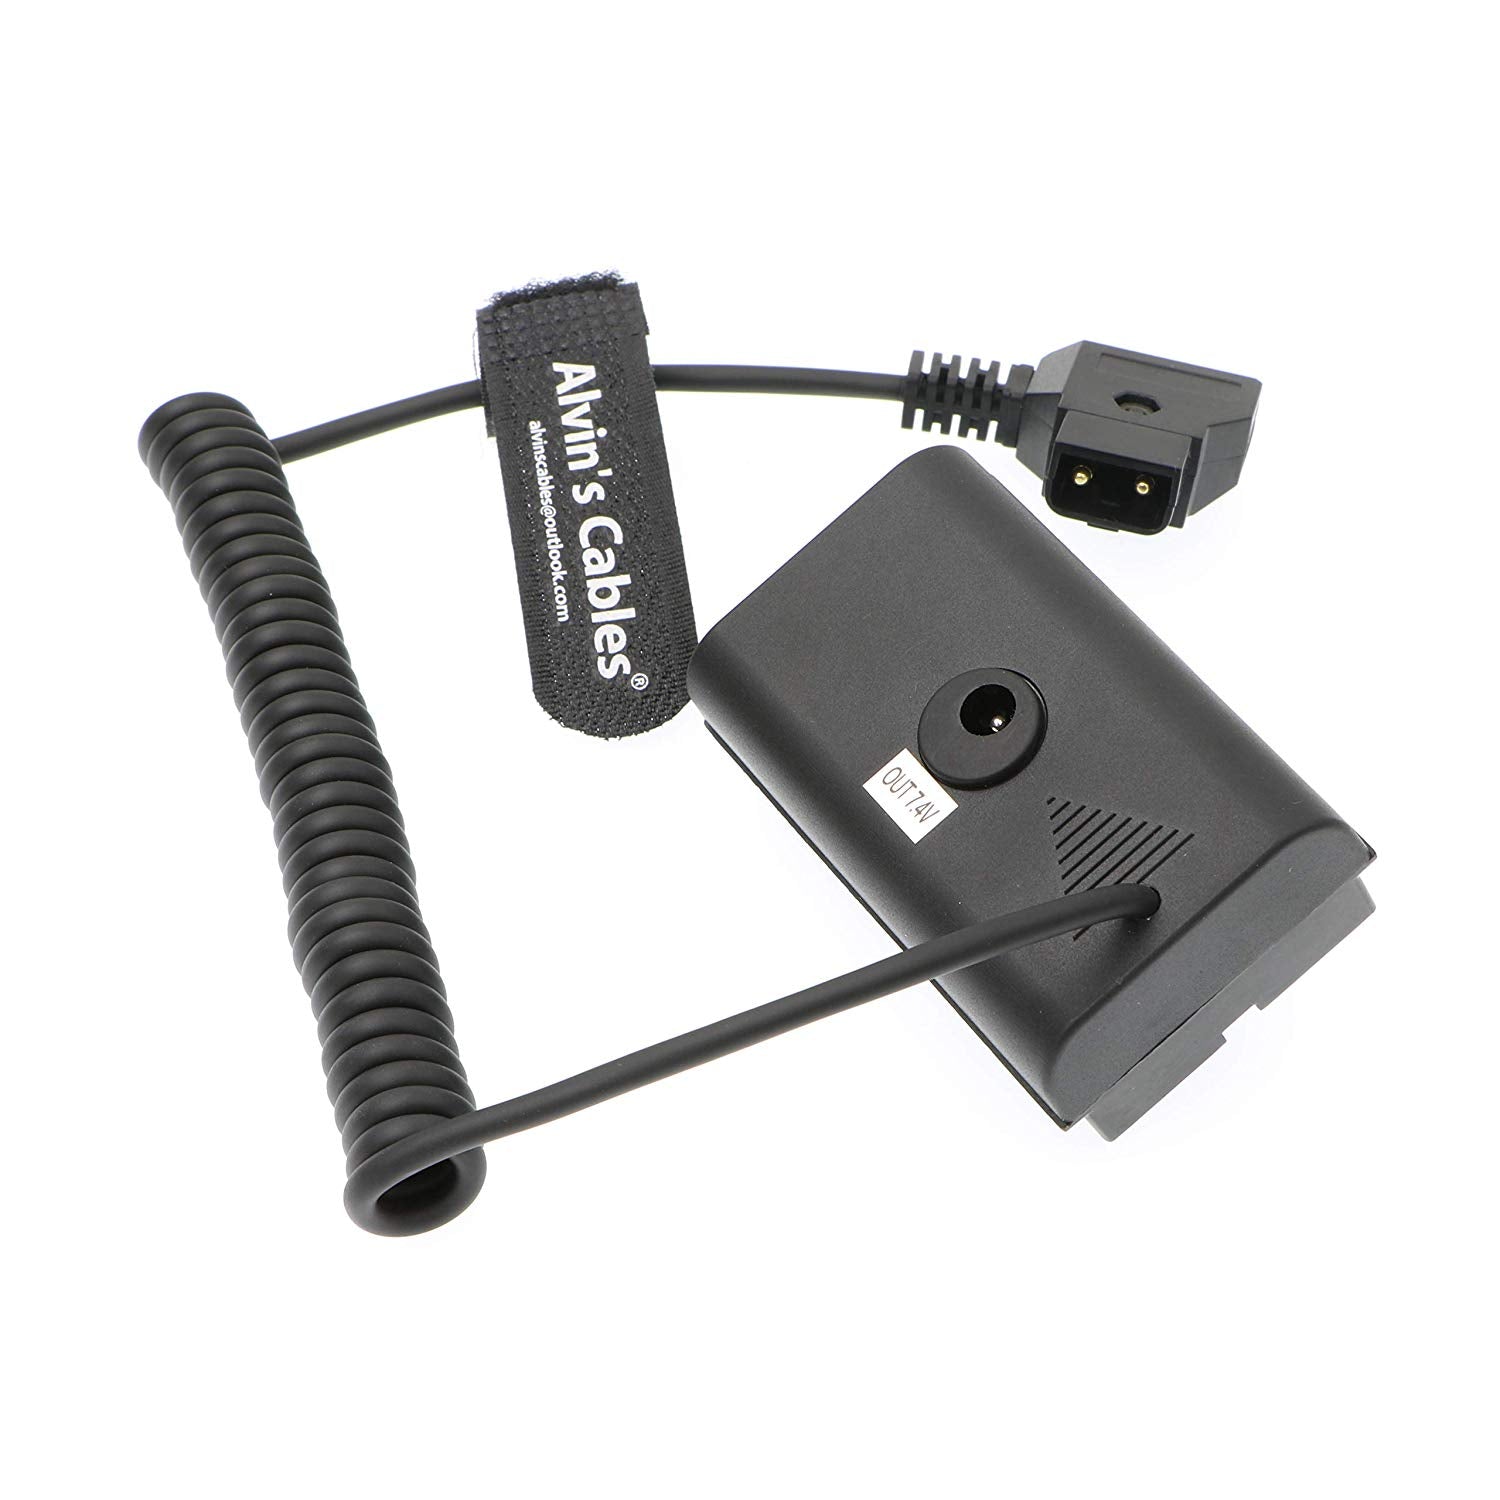 Alvin's Cables NP F550 Dummy Battery to D Tap Coiled Power Cable for Sony NP F570 NP F970 Monitor